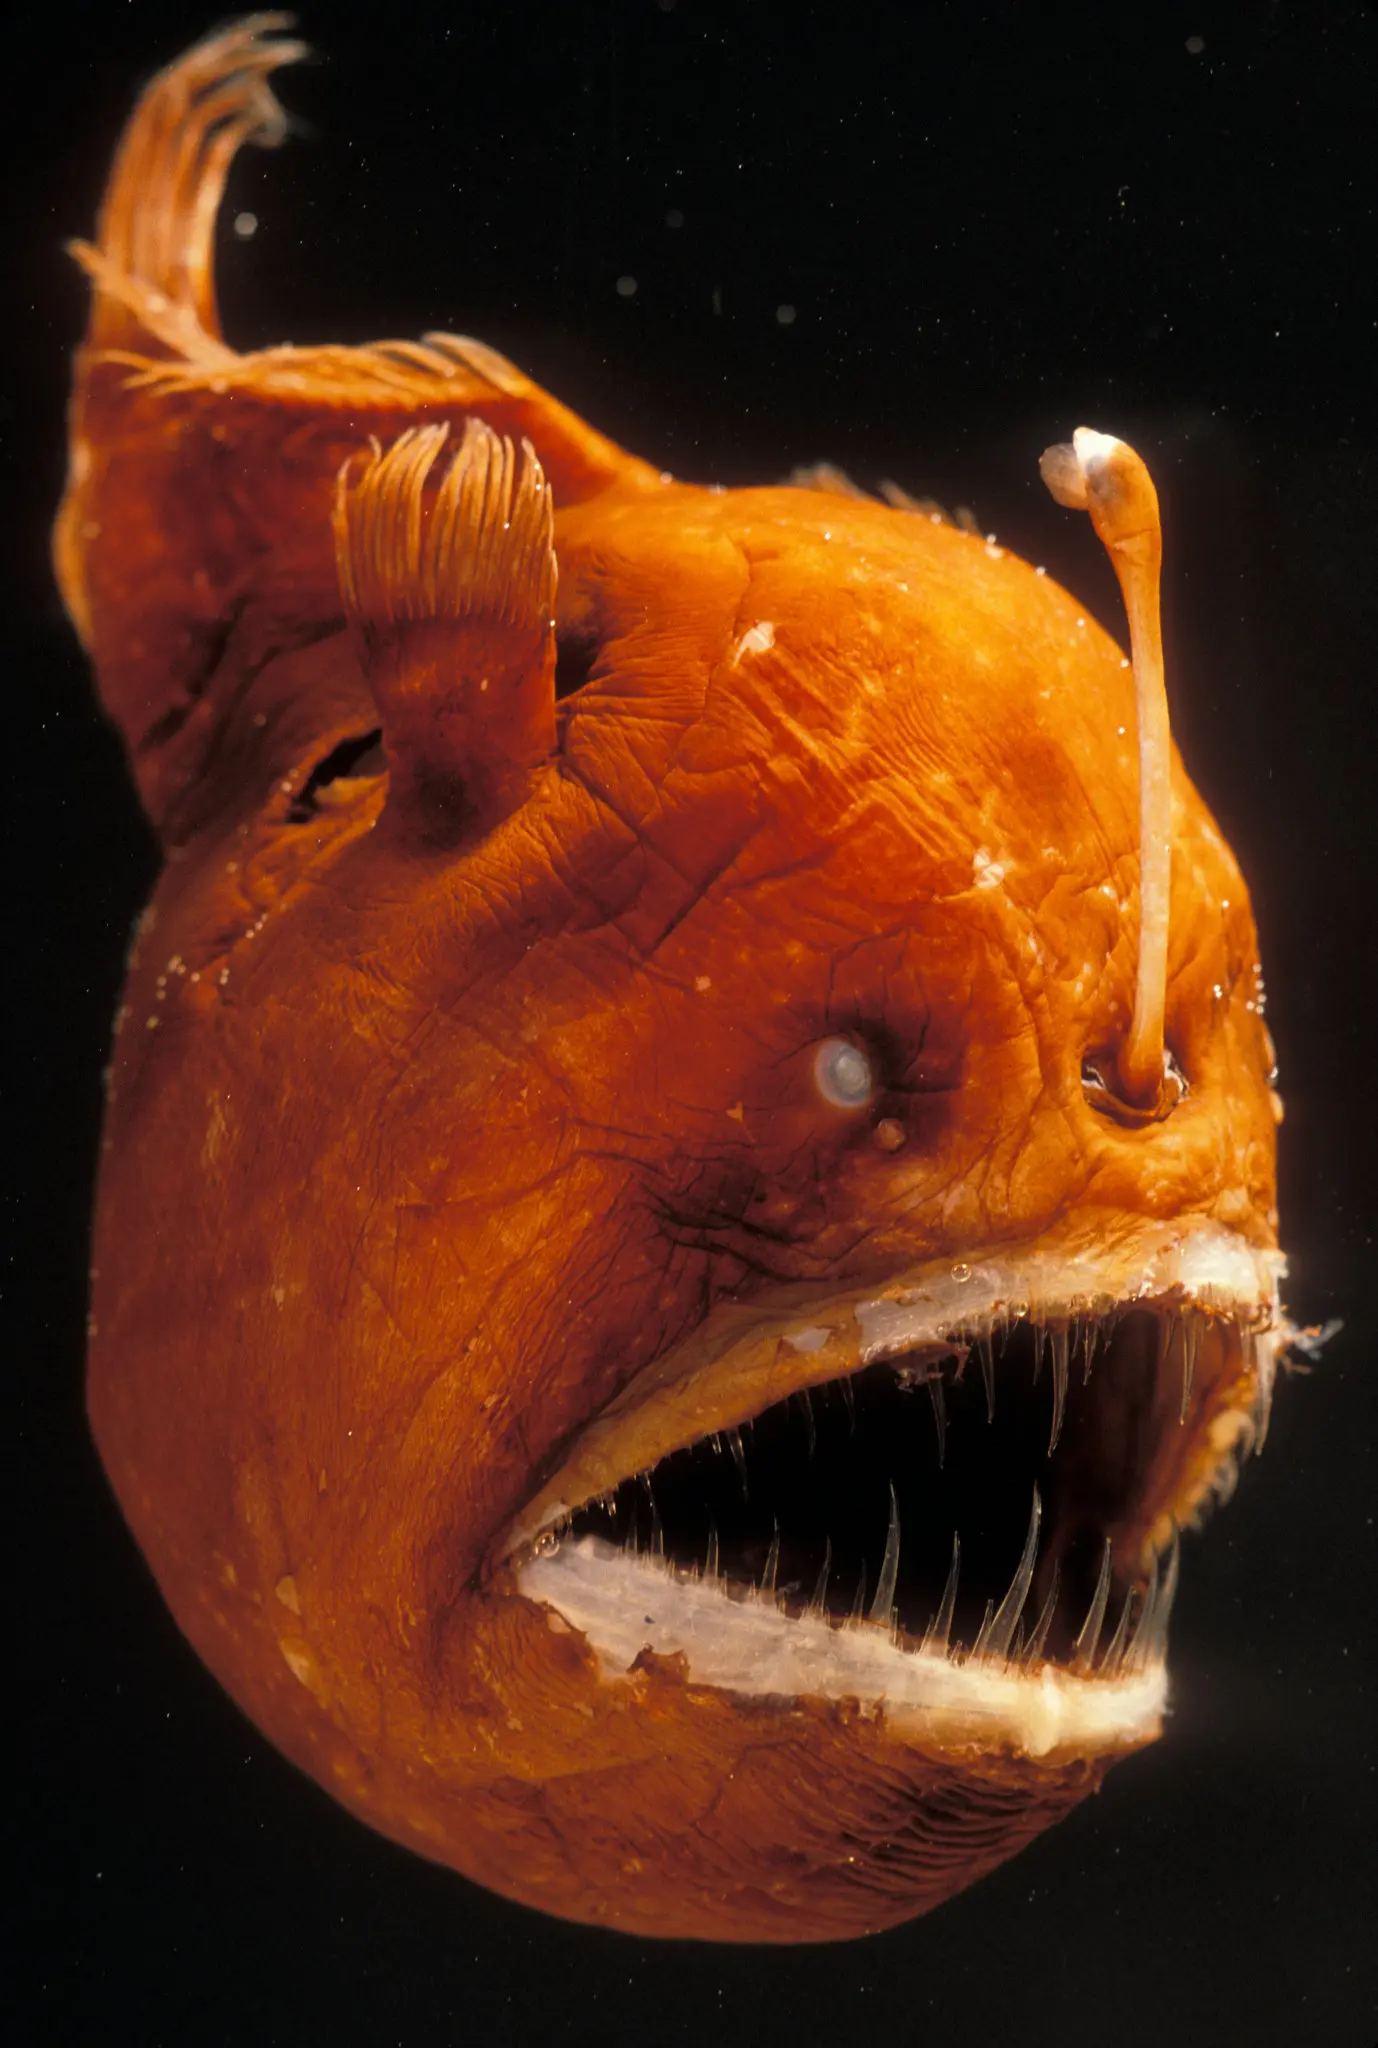 The Creepy Anglerfish Comes to Light. (Just Don't Get Too Close.)